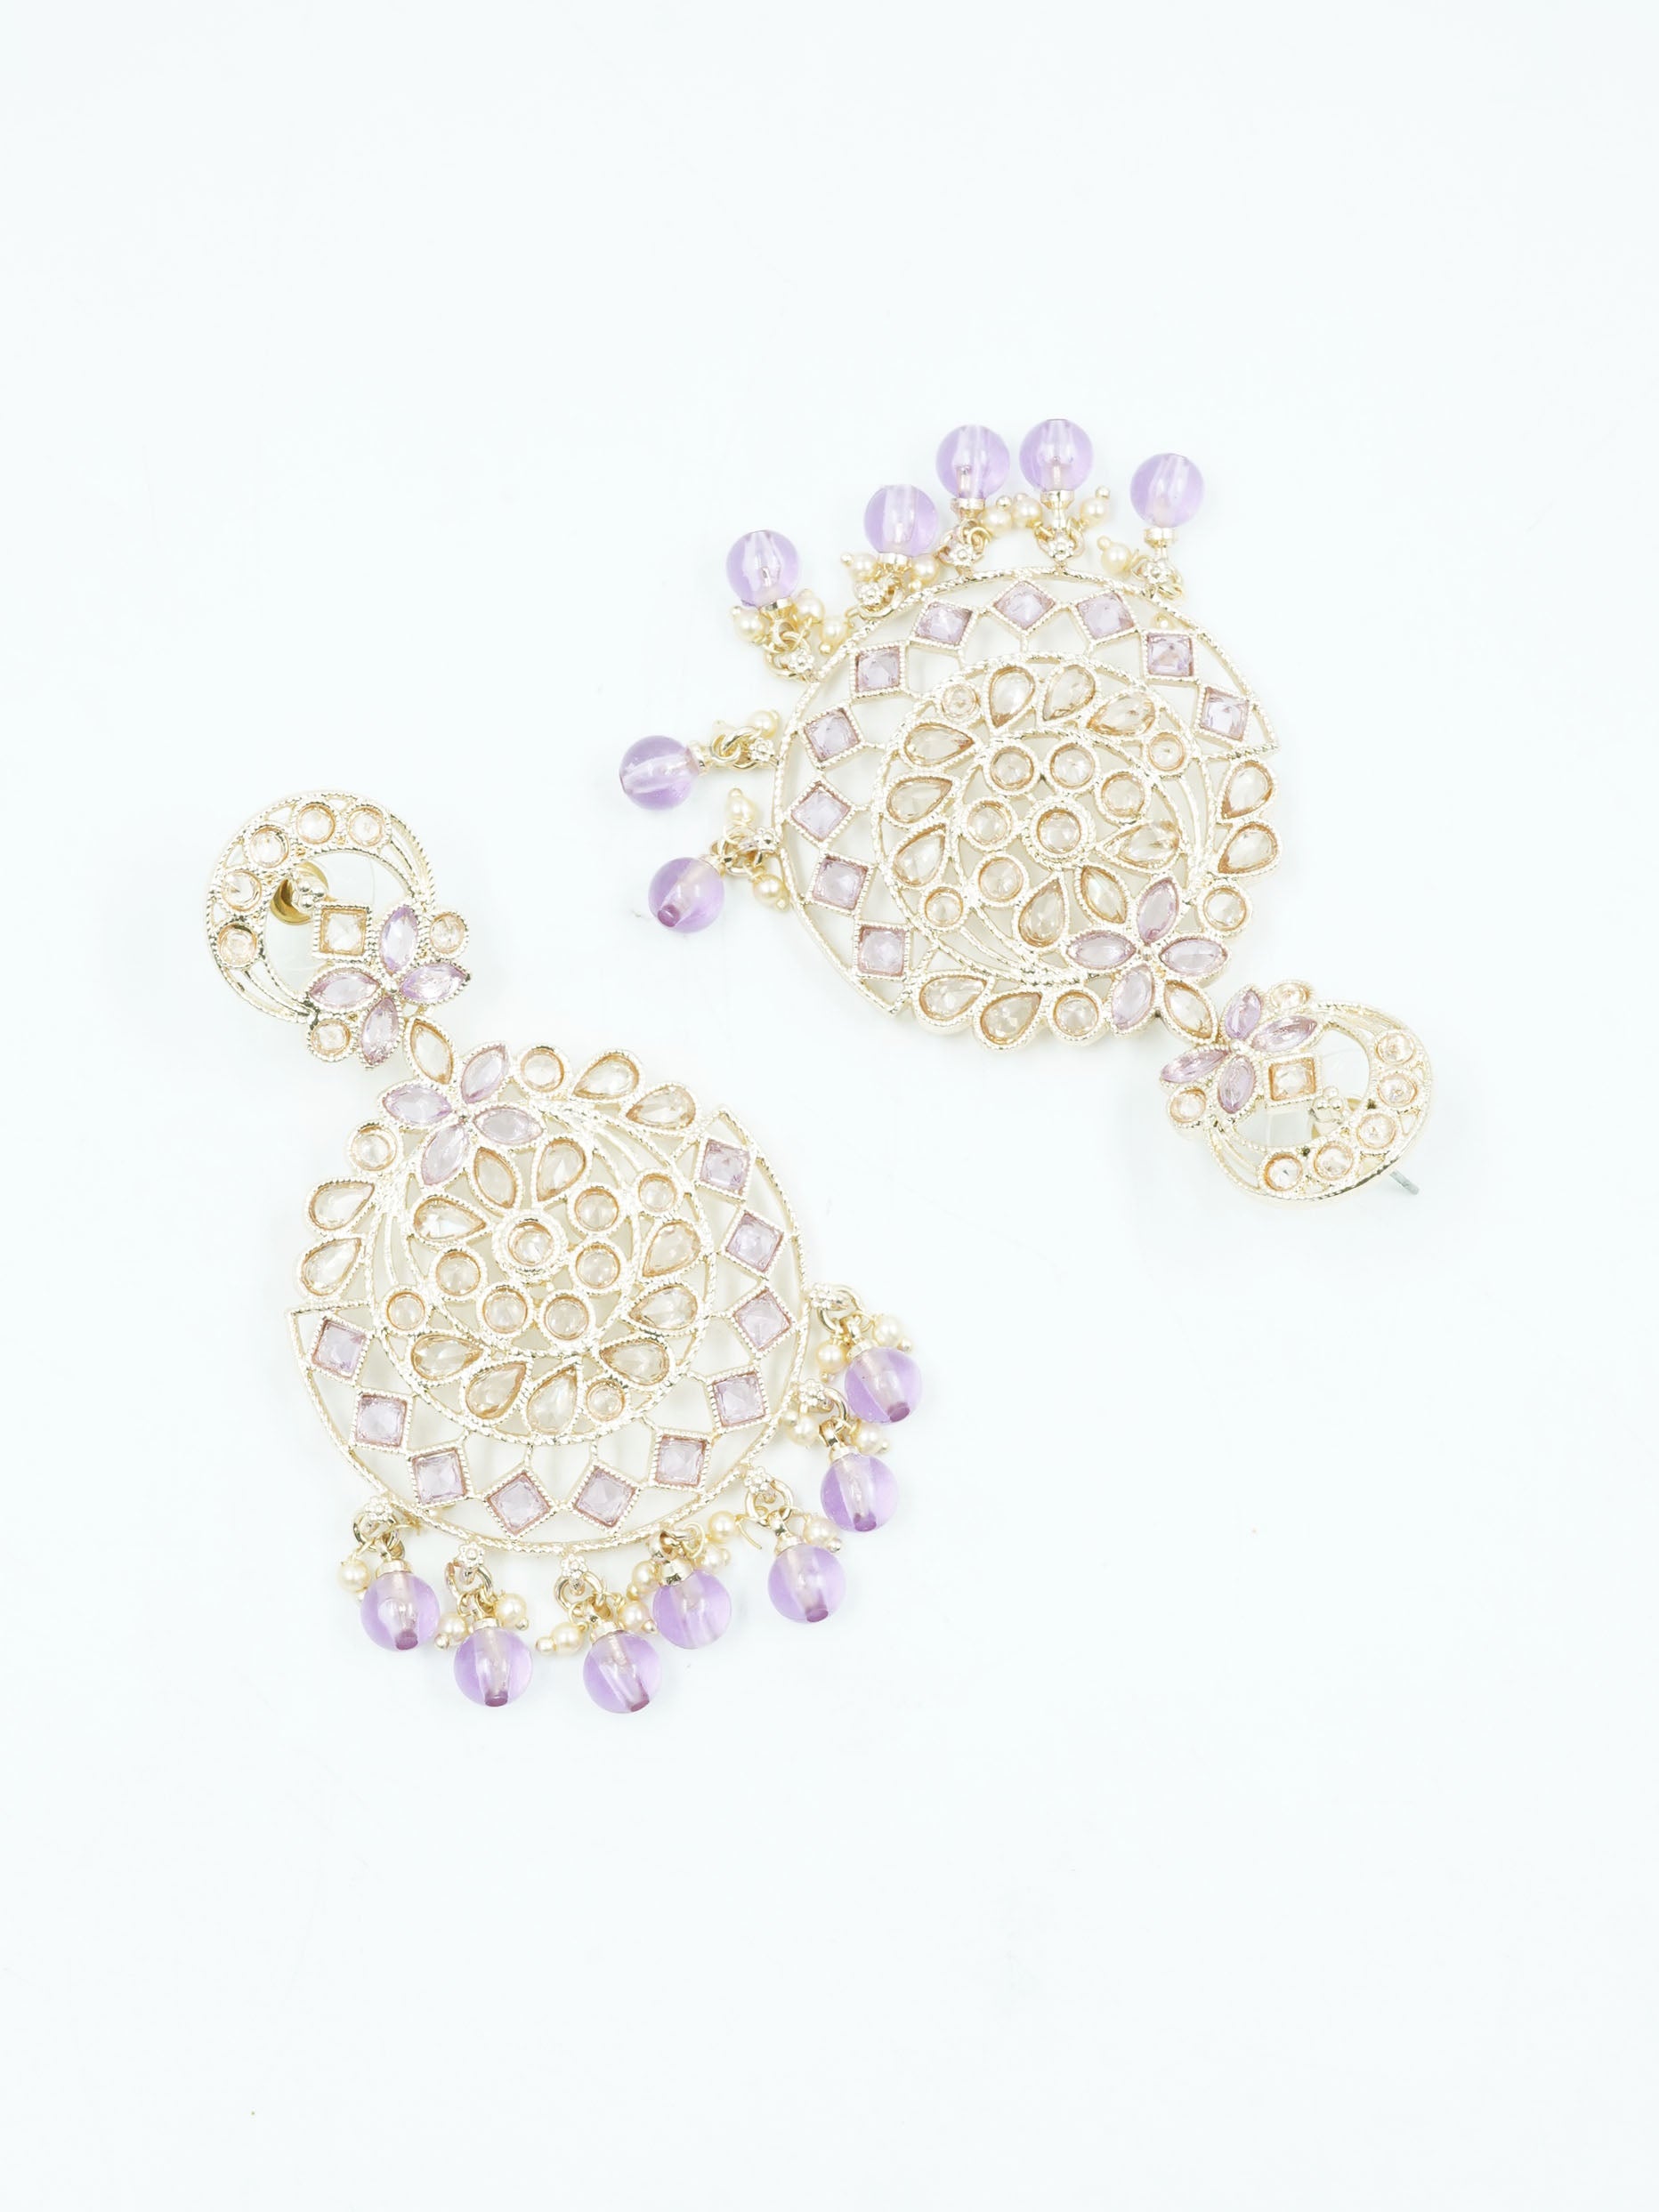 Faint gold finish Earring/jhumka/Dangler with Lavender Color Stones 11809N